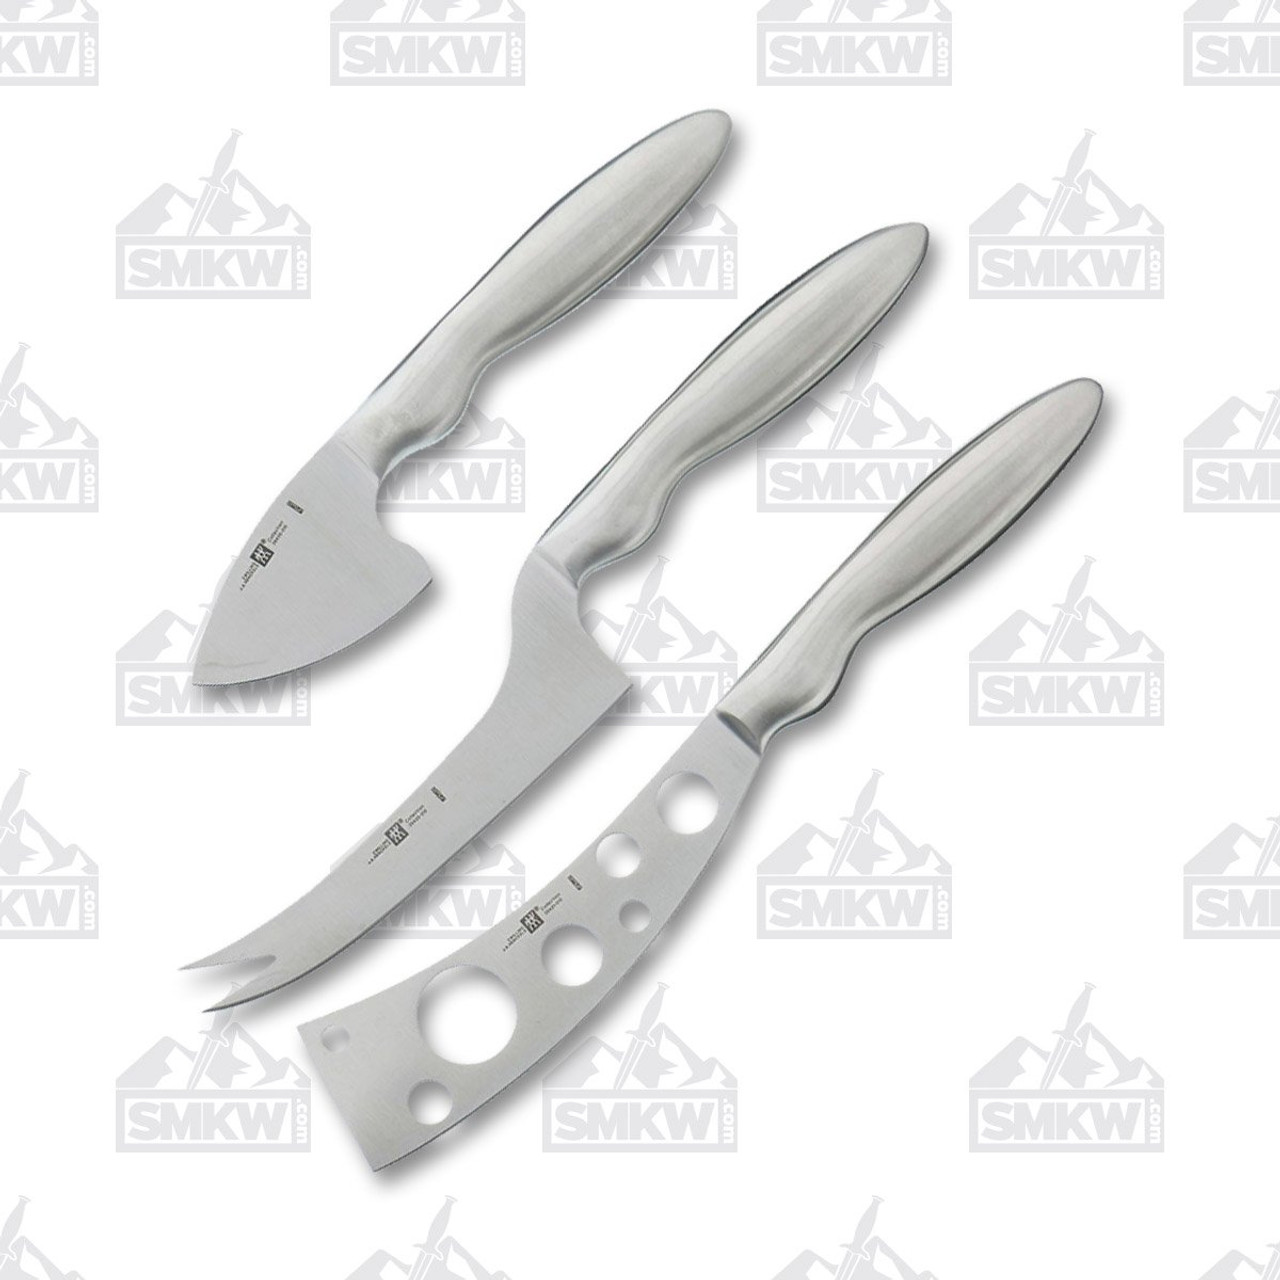 Zwilling J.A. Henckels 3-Piece Cheese Knife Set